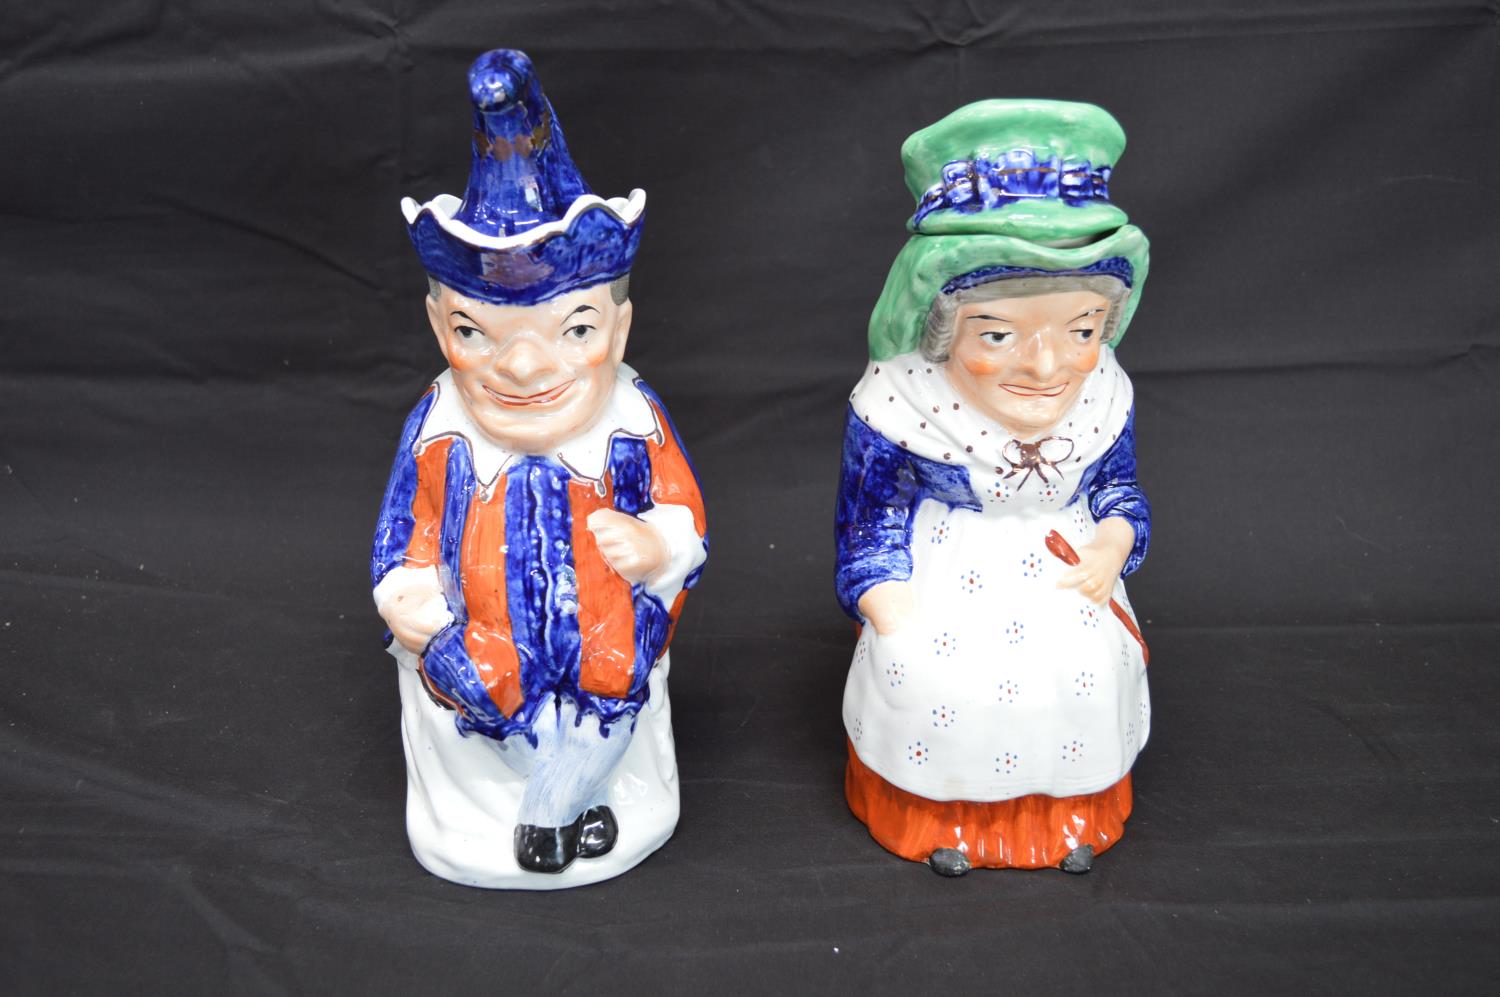 Pair of Staffordshire Toby jugs in the form of Punch and Judy complete with hat formed lids - 28cm